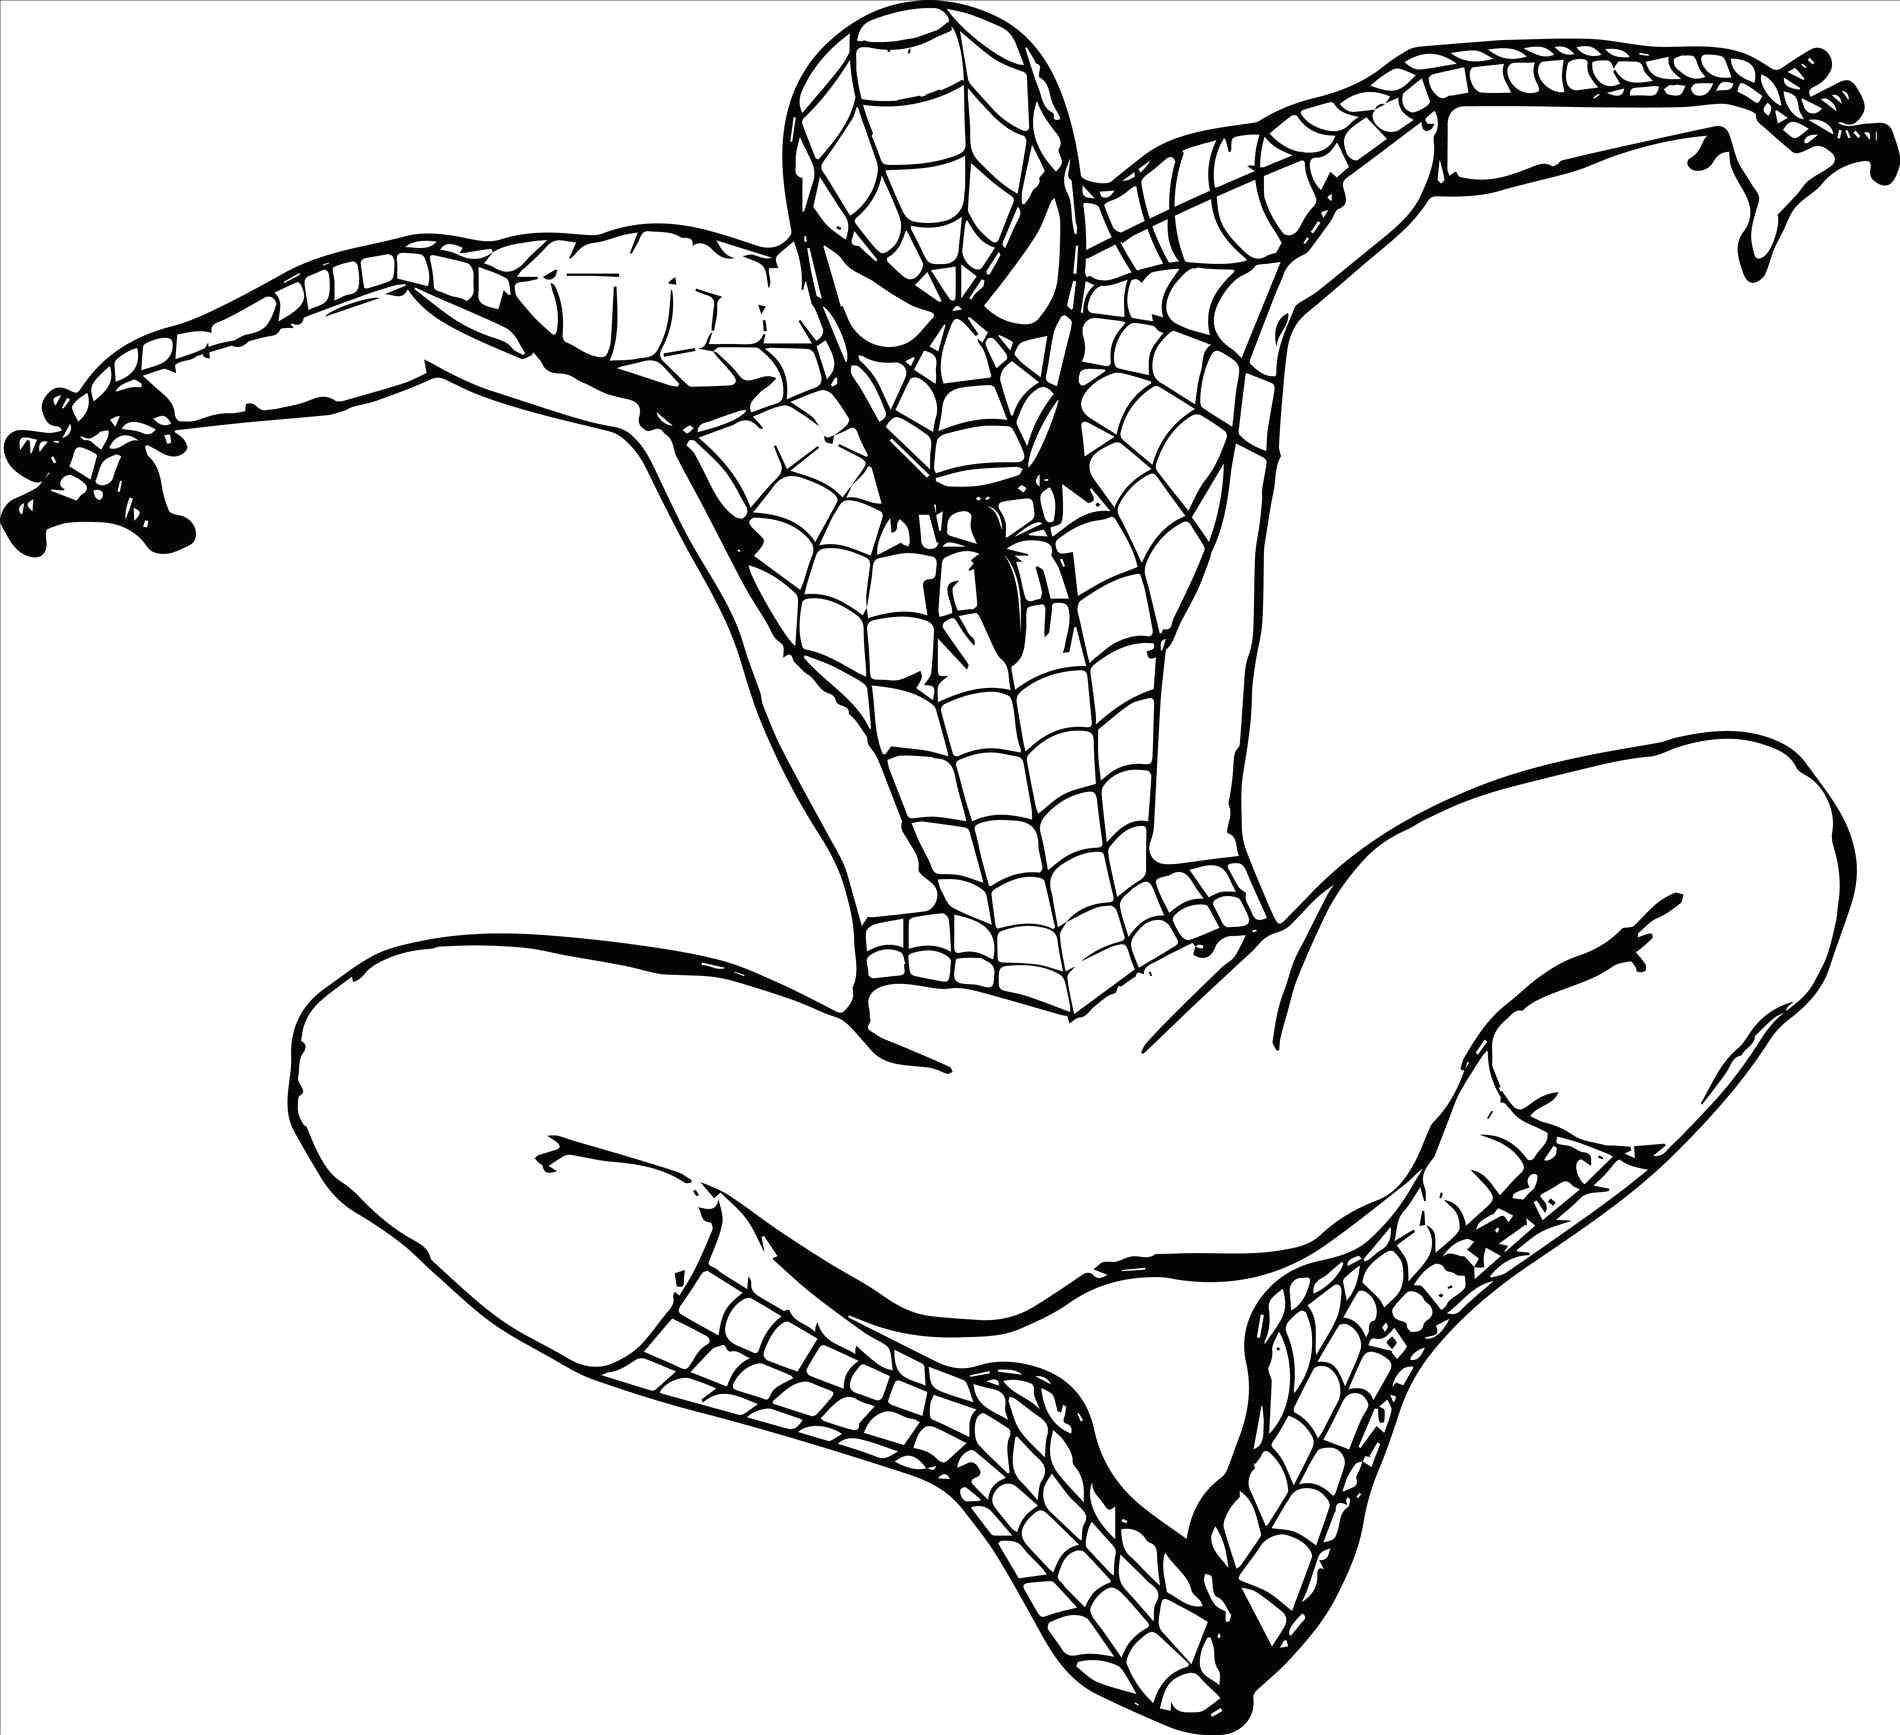 Easy Drawings Superheroes Superheroes Easy to Draw Spiderman Coloring Pages Luxury 0 0d